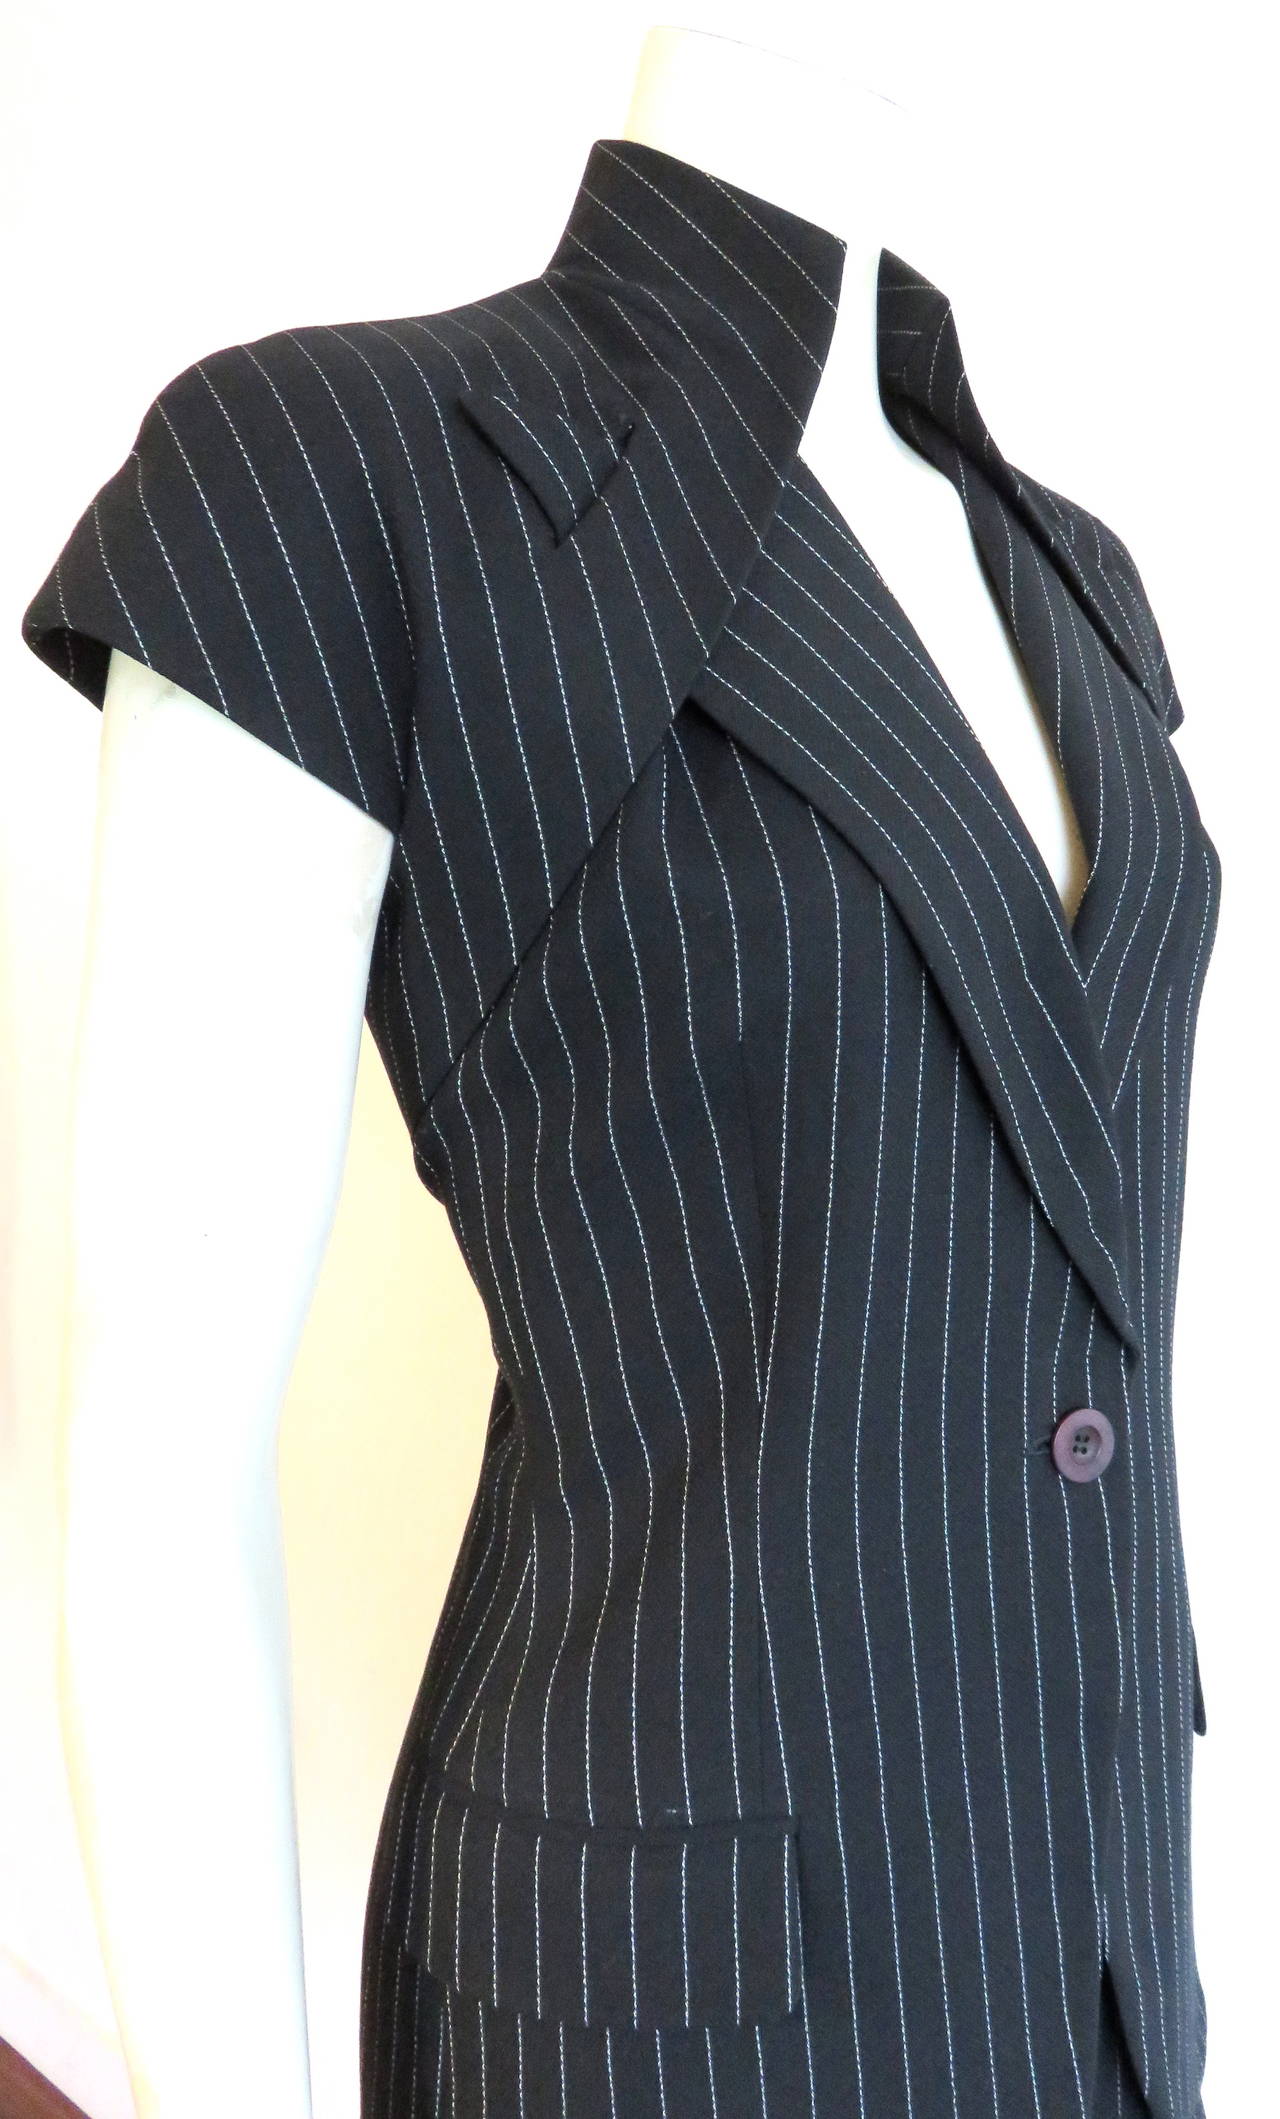 1998 GIVENCHY COUTURE by ALEXANDER McQUEEN Pinstripe skirt suit In Excellent Condition For Sale In Newport Beach, CA